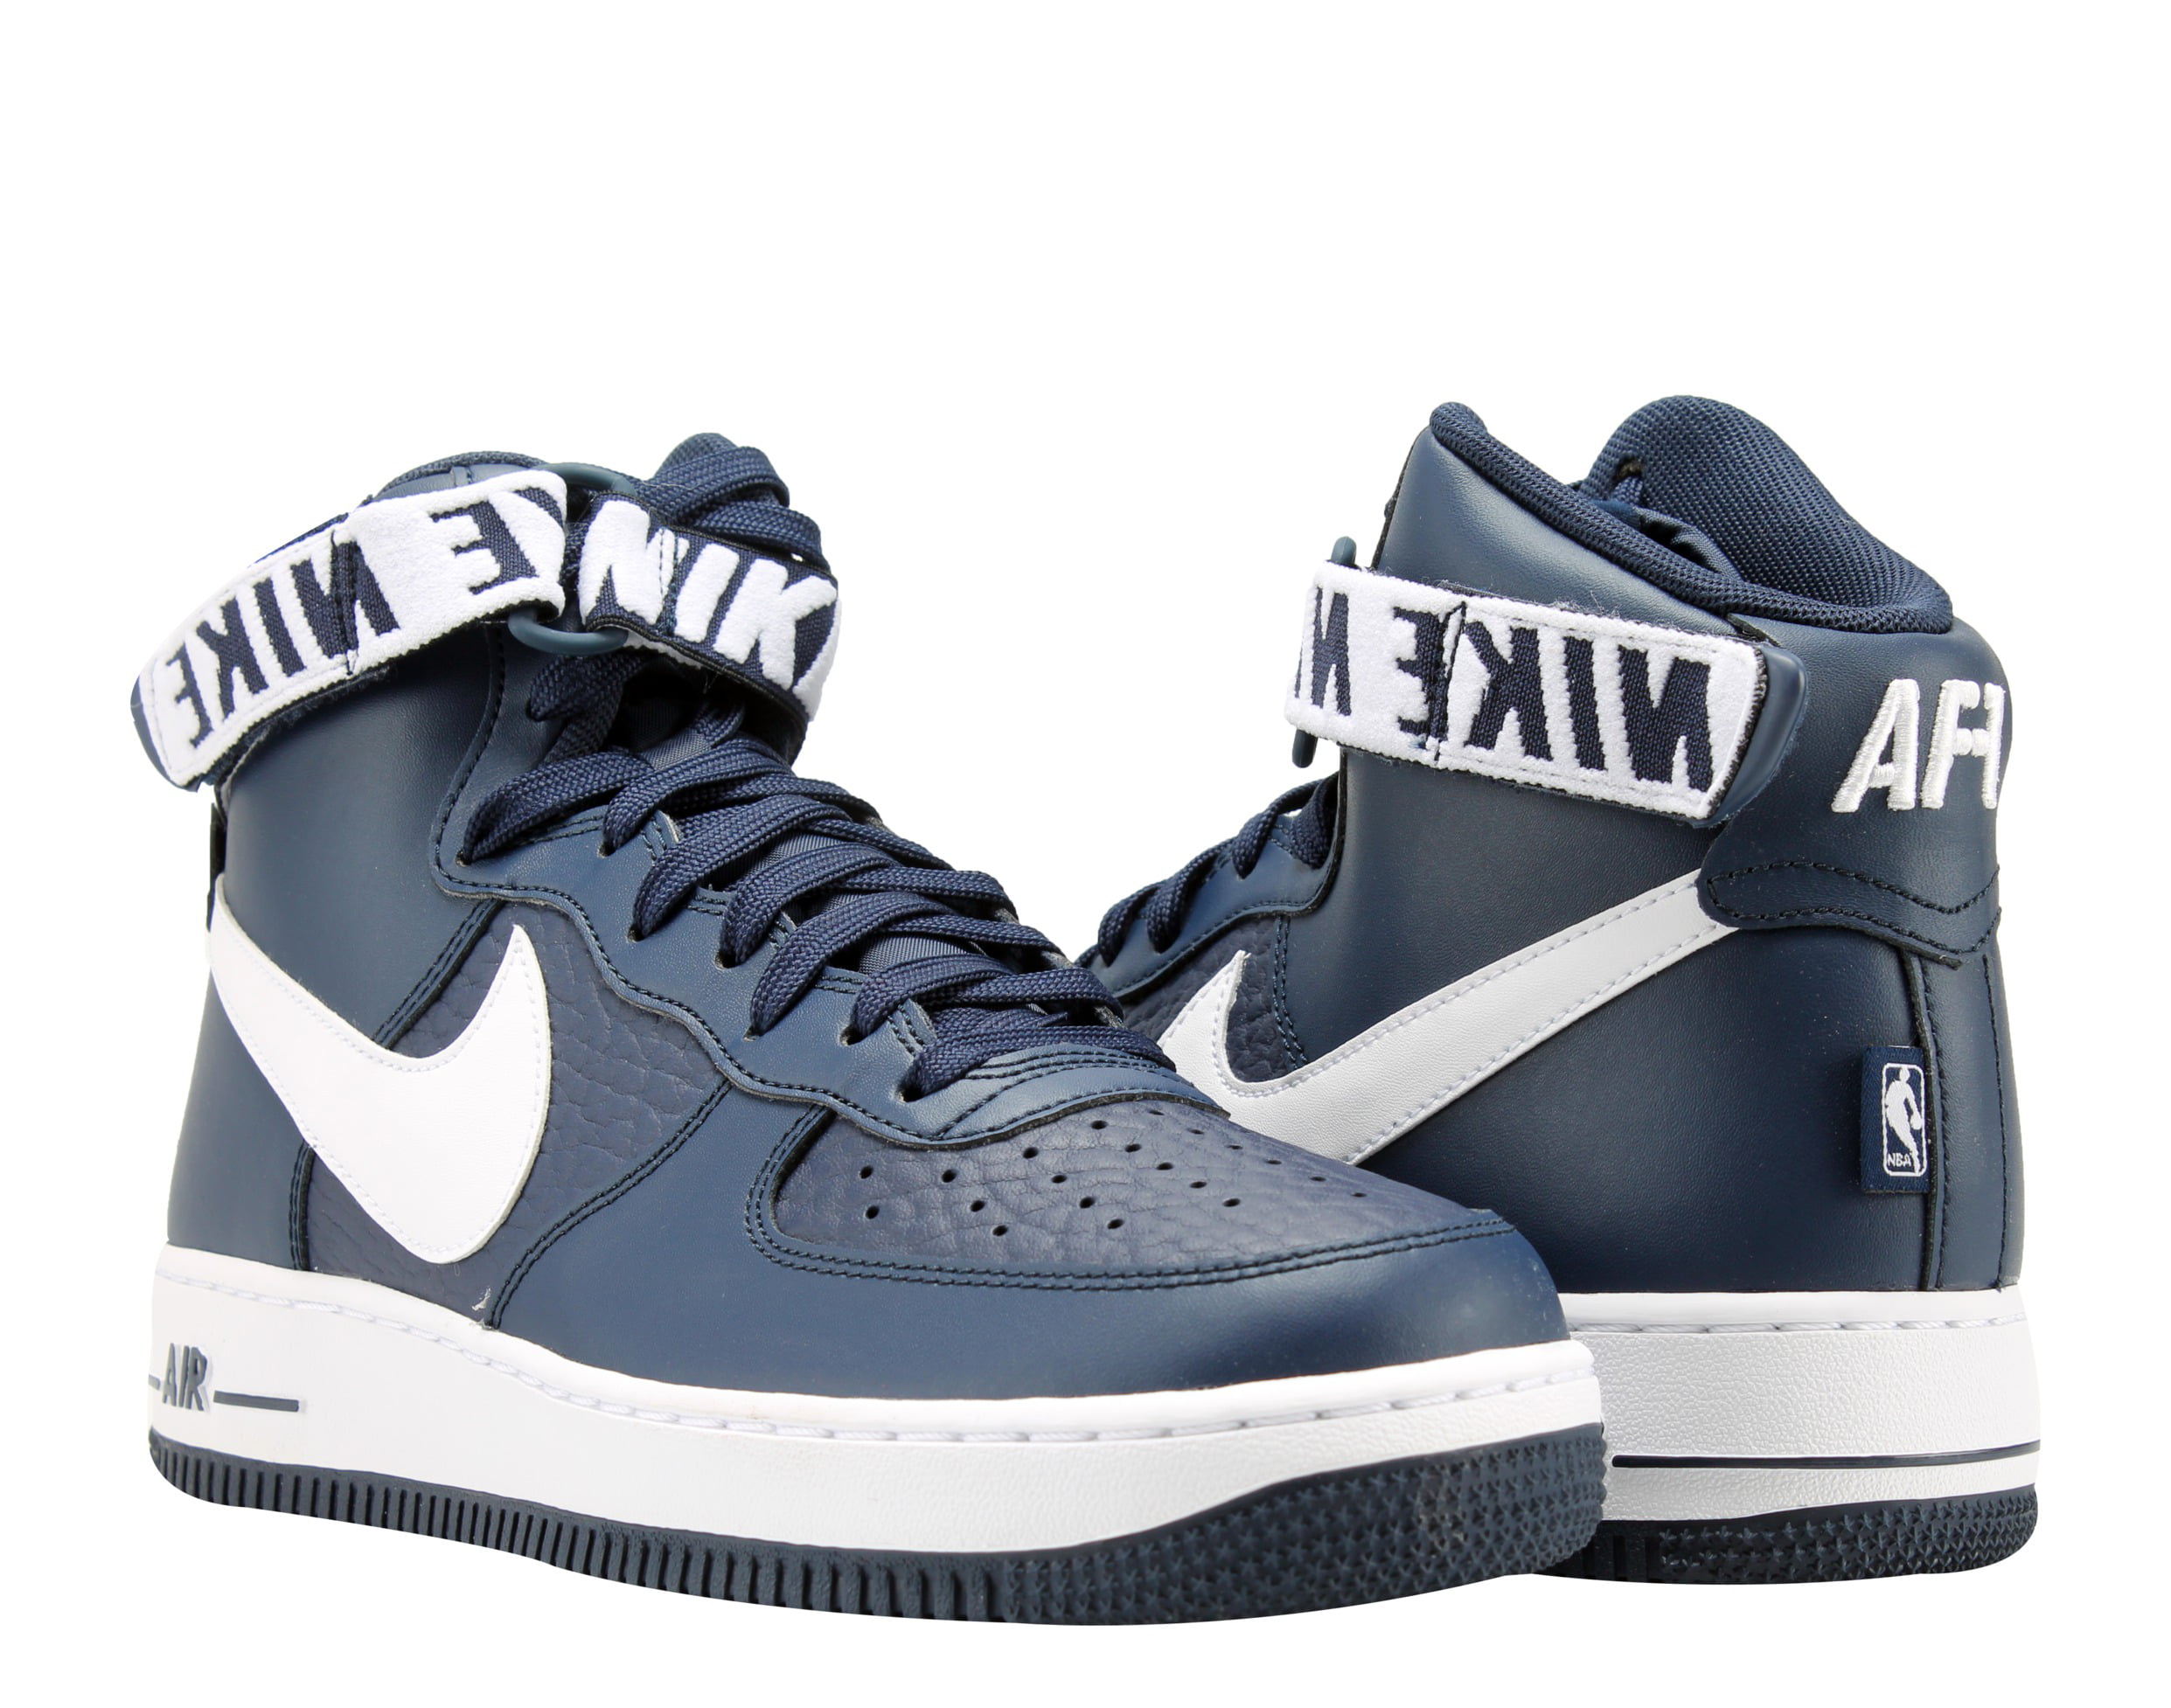 colateral domingo tema Nike Air Force 1 High '07 "NBA Pack" Men's Shoes College Navy/White  315121-414 - Walmart.com